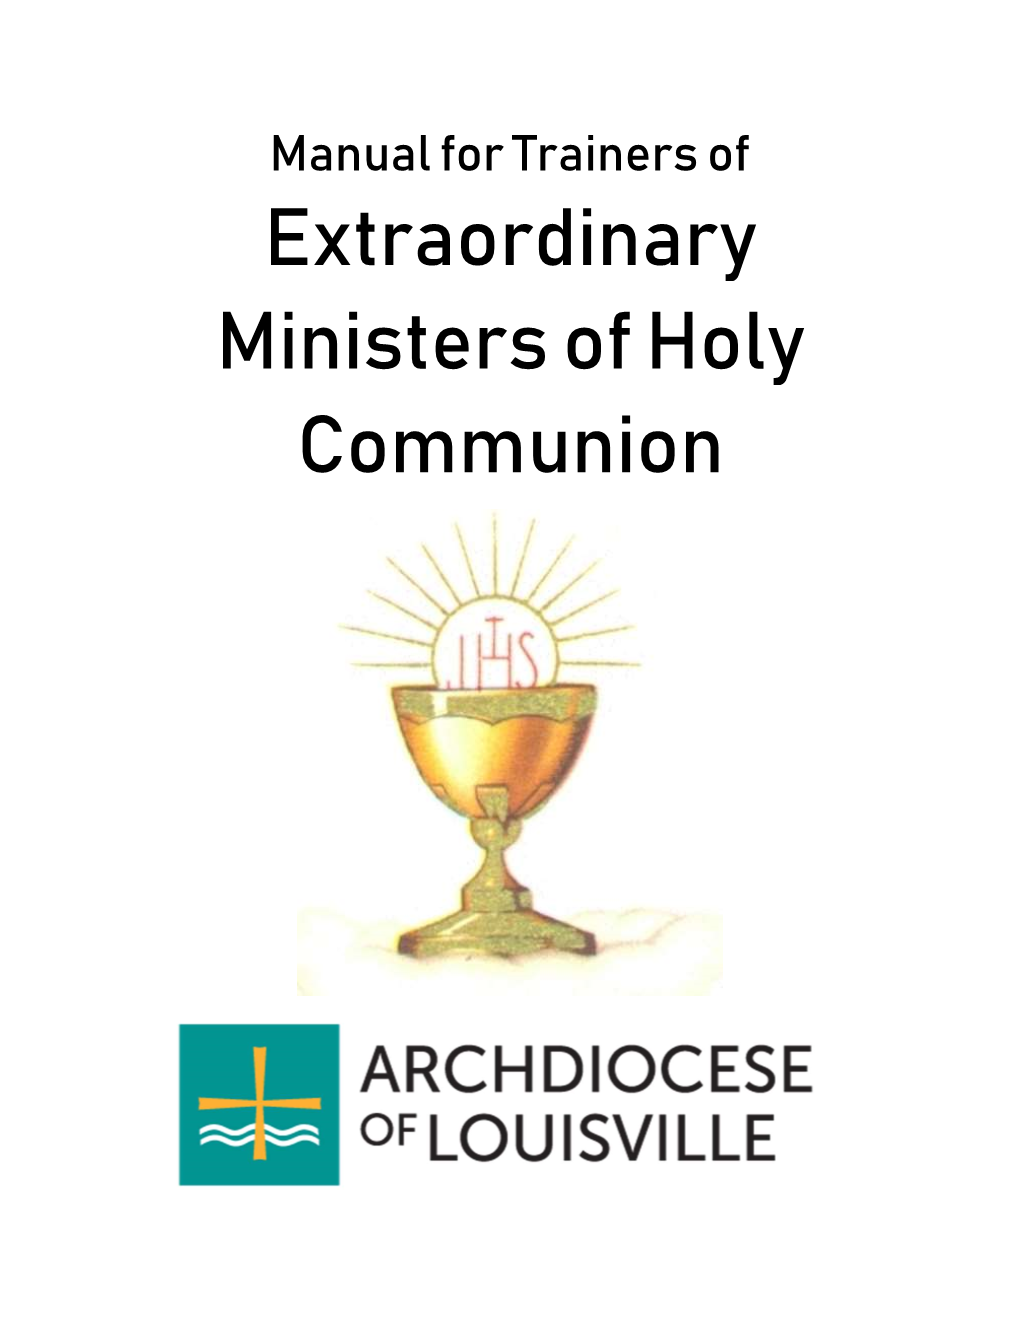 Manual for Extraordinary Ministers of Holy Communion